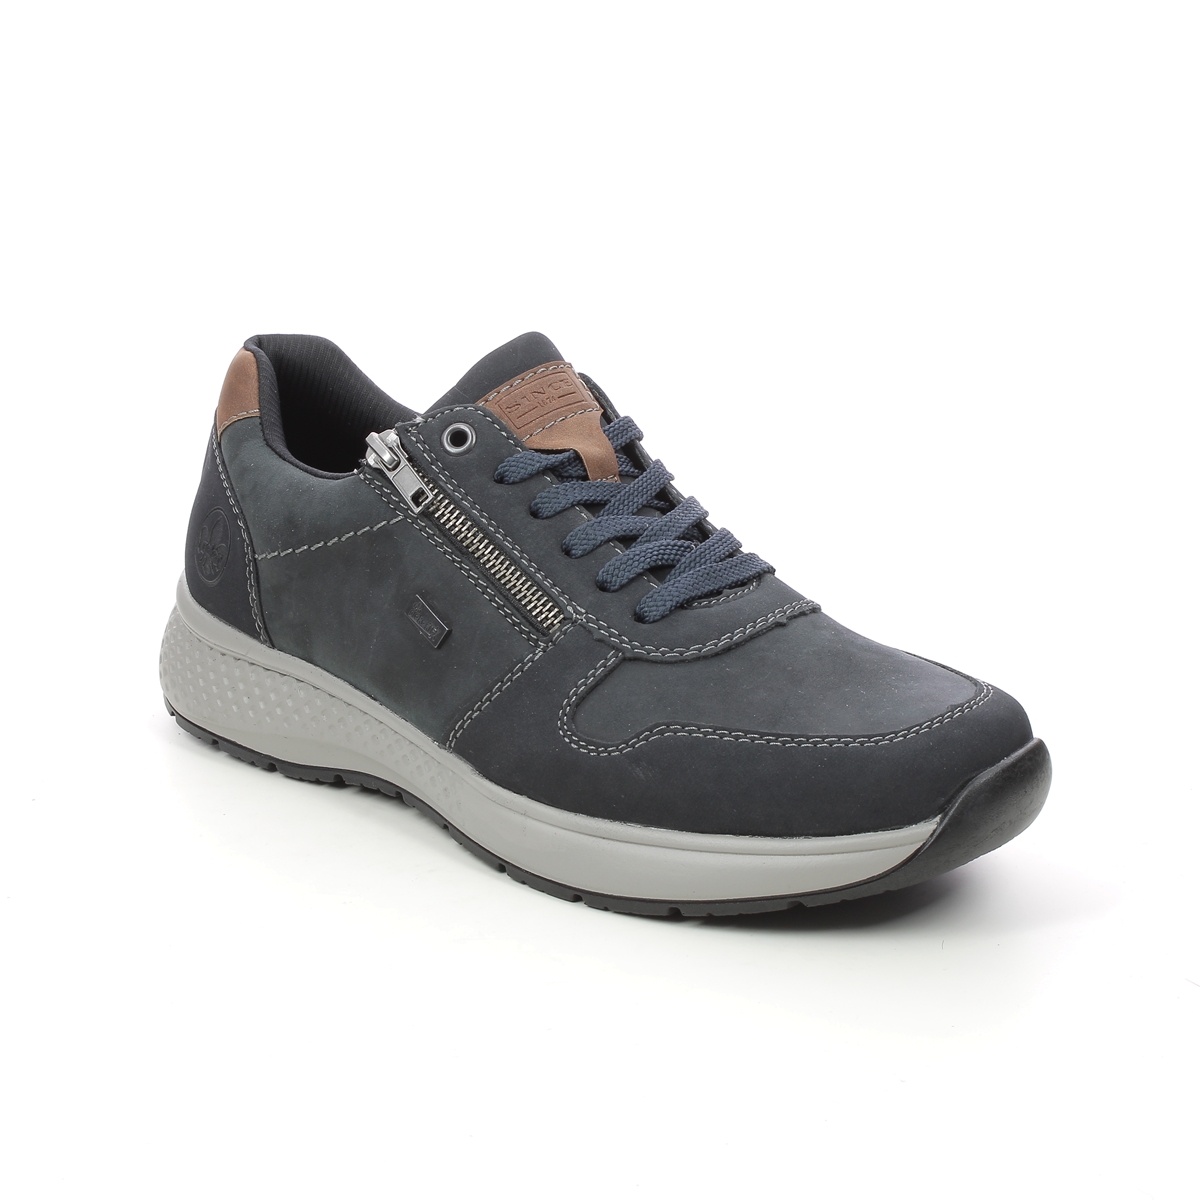 Rieker Delson Zip Tex Navy Leather Mens Comfort Shoes B7613-14 In Size 41 In Plain Navy Leather